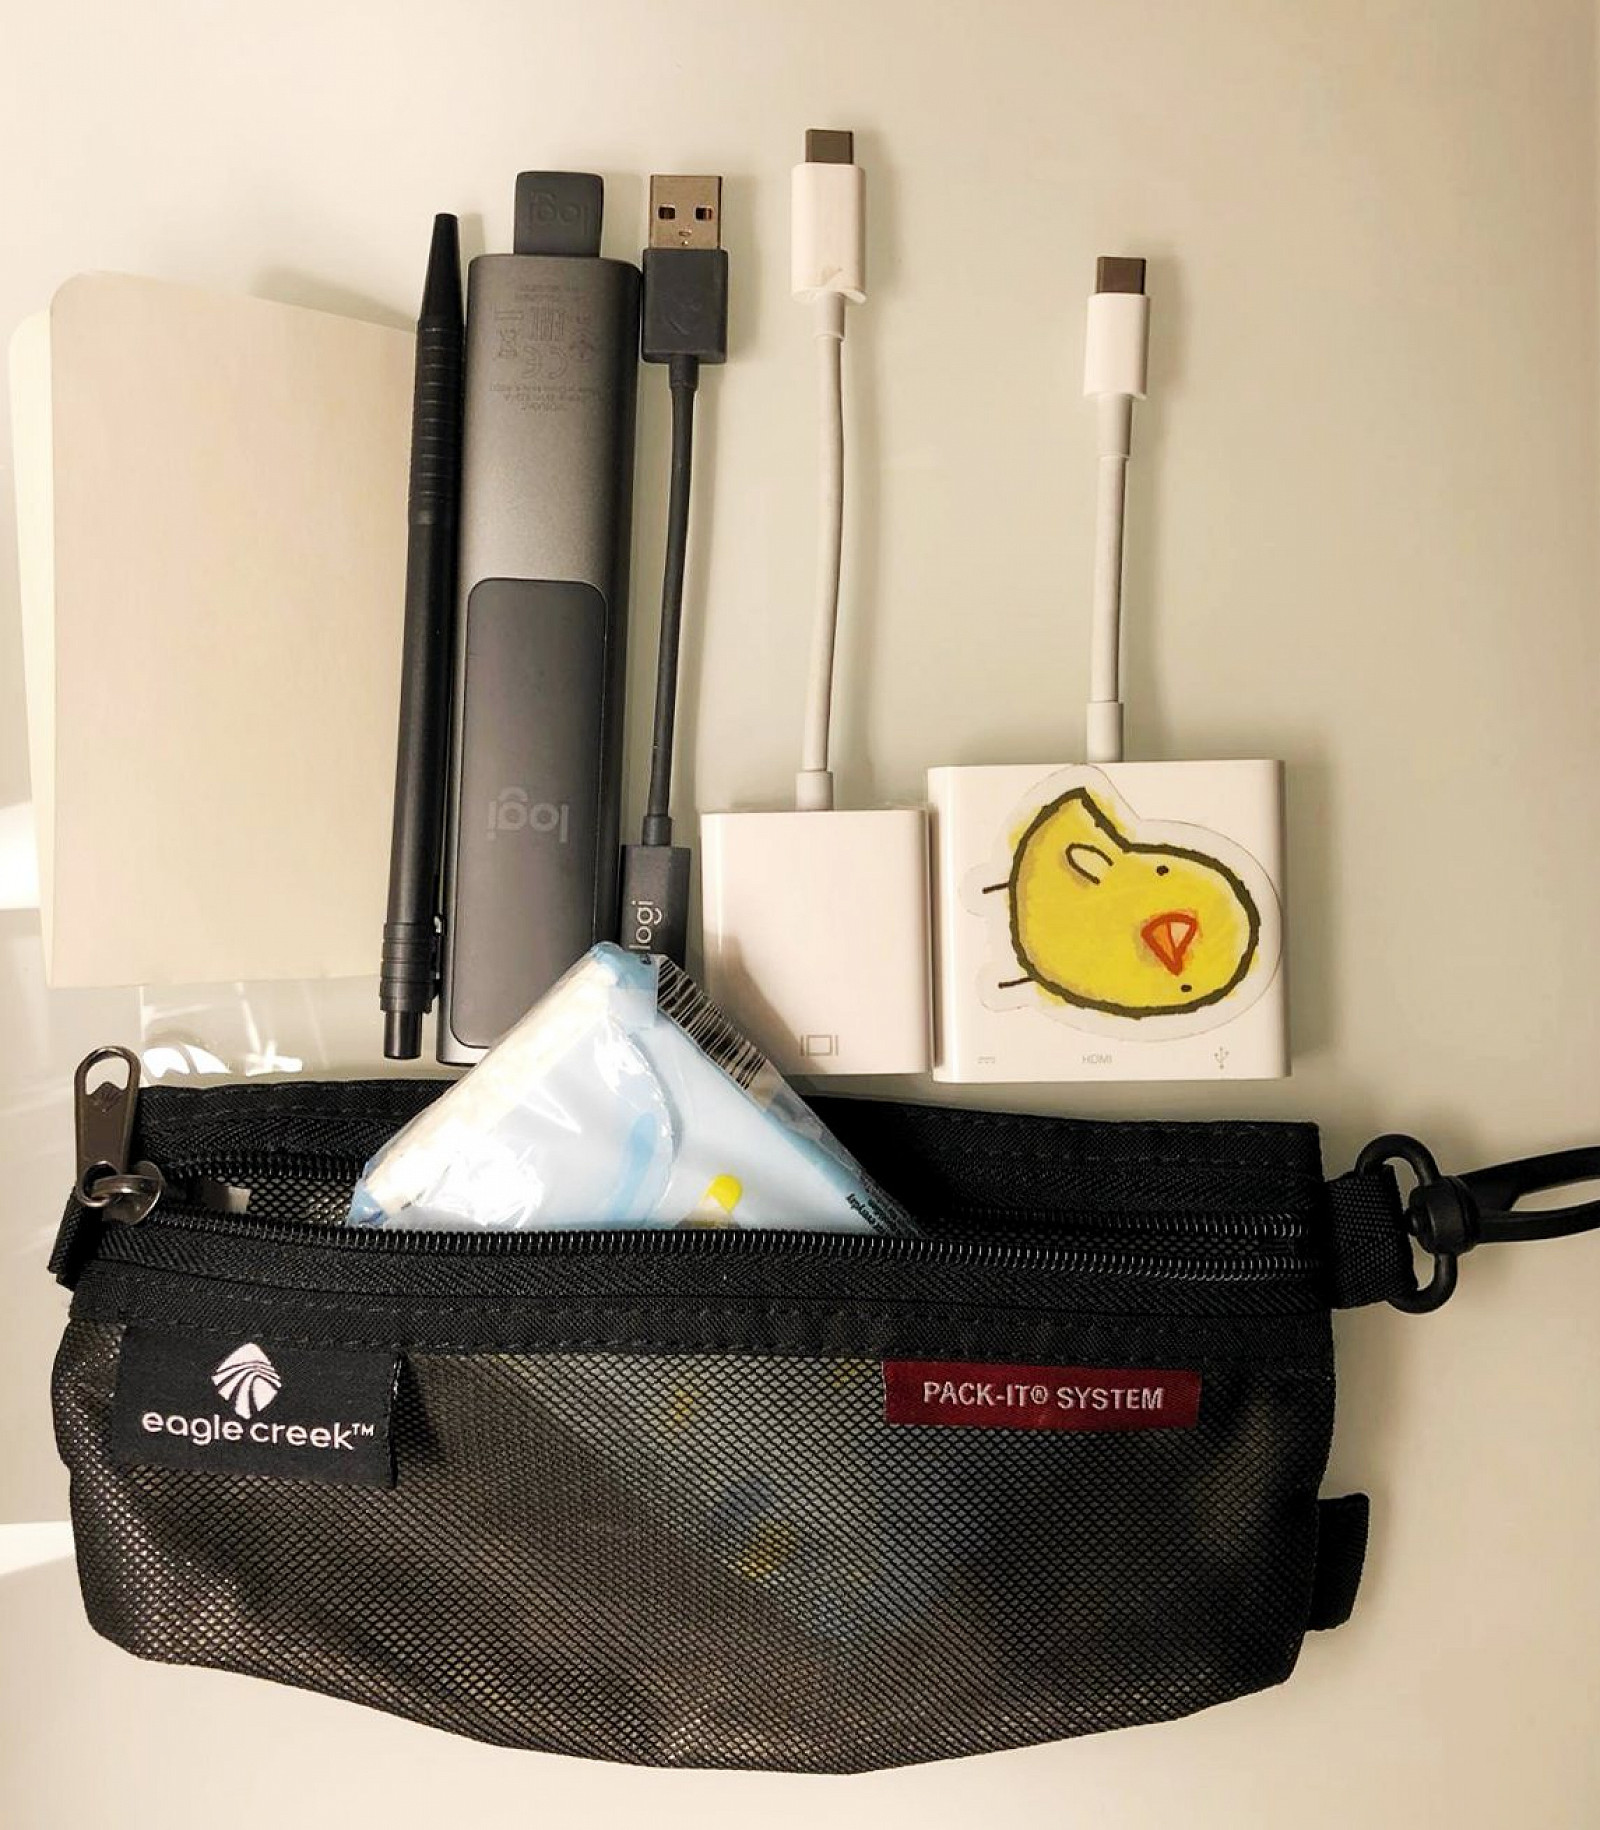 A travel kit including items mentioned in the post.